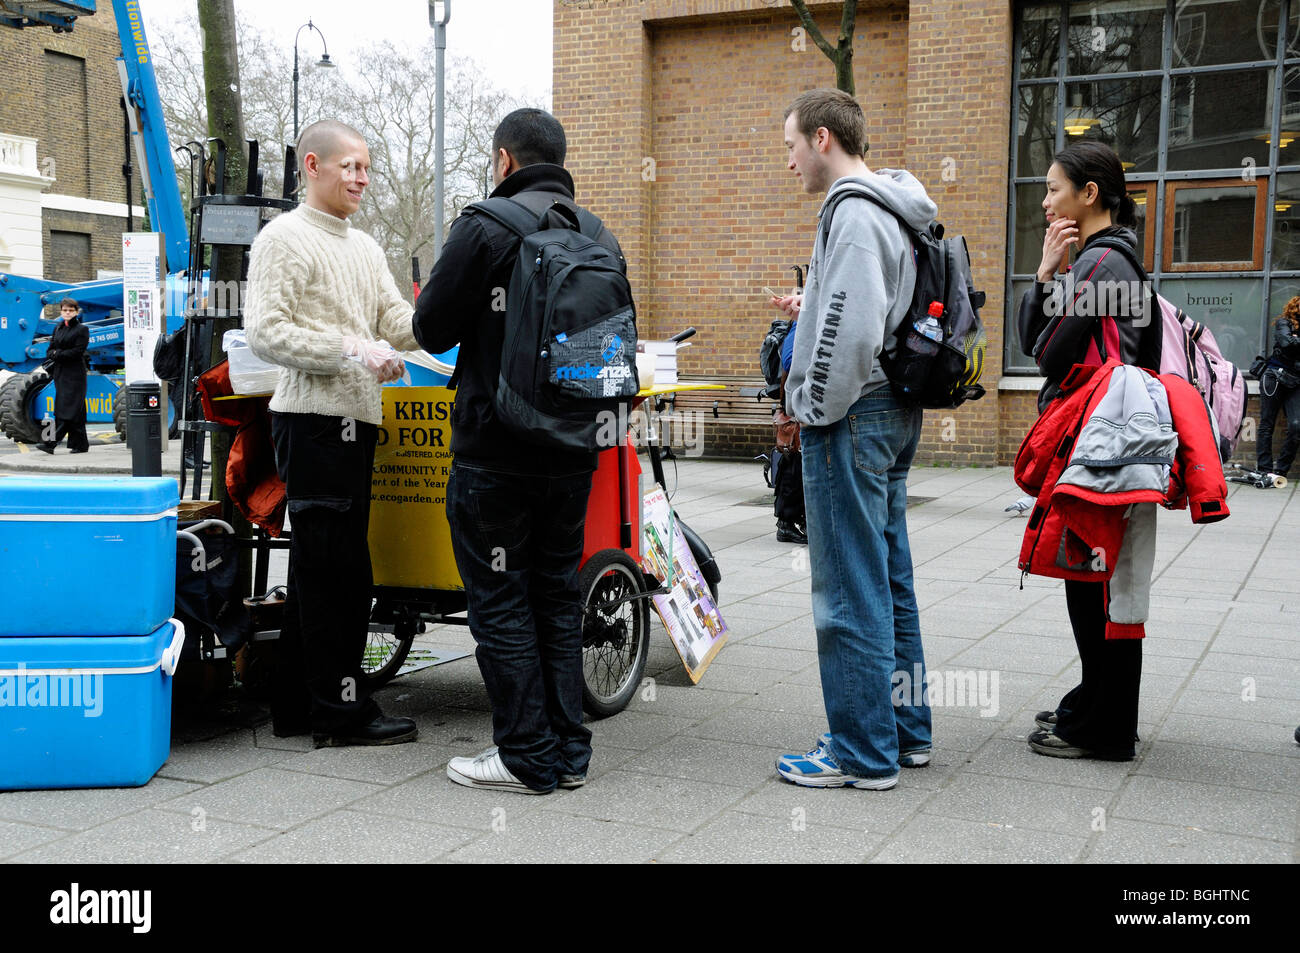 Man from the Hare Krishna Movement serving free food London England UK Stock Photo